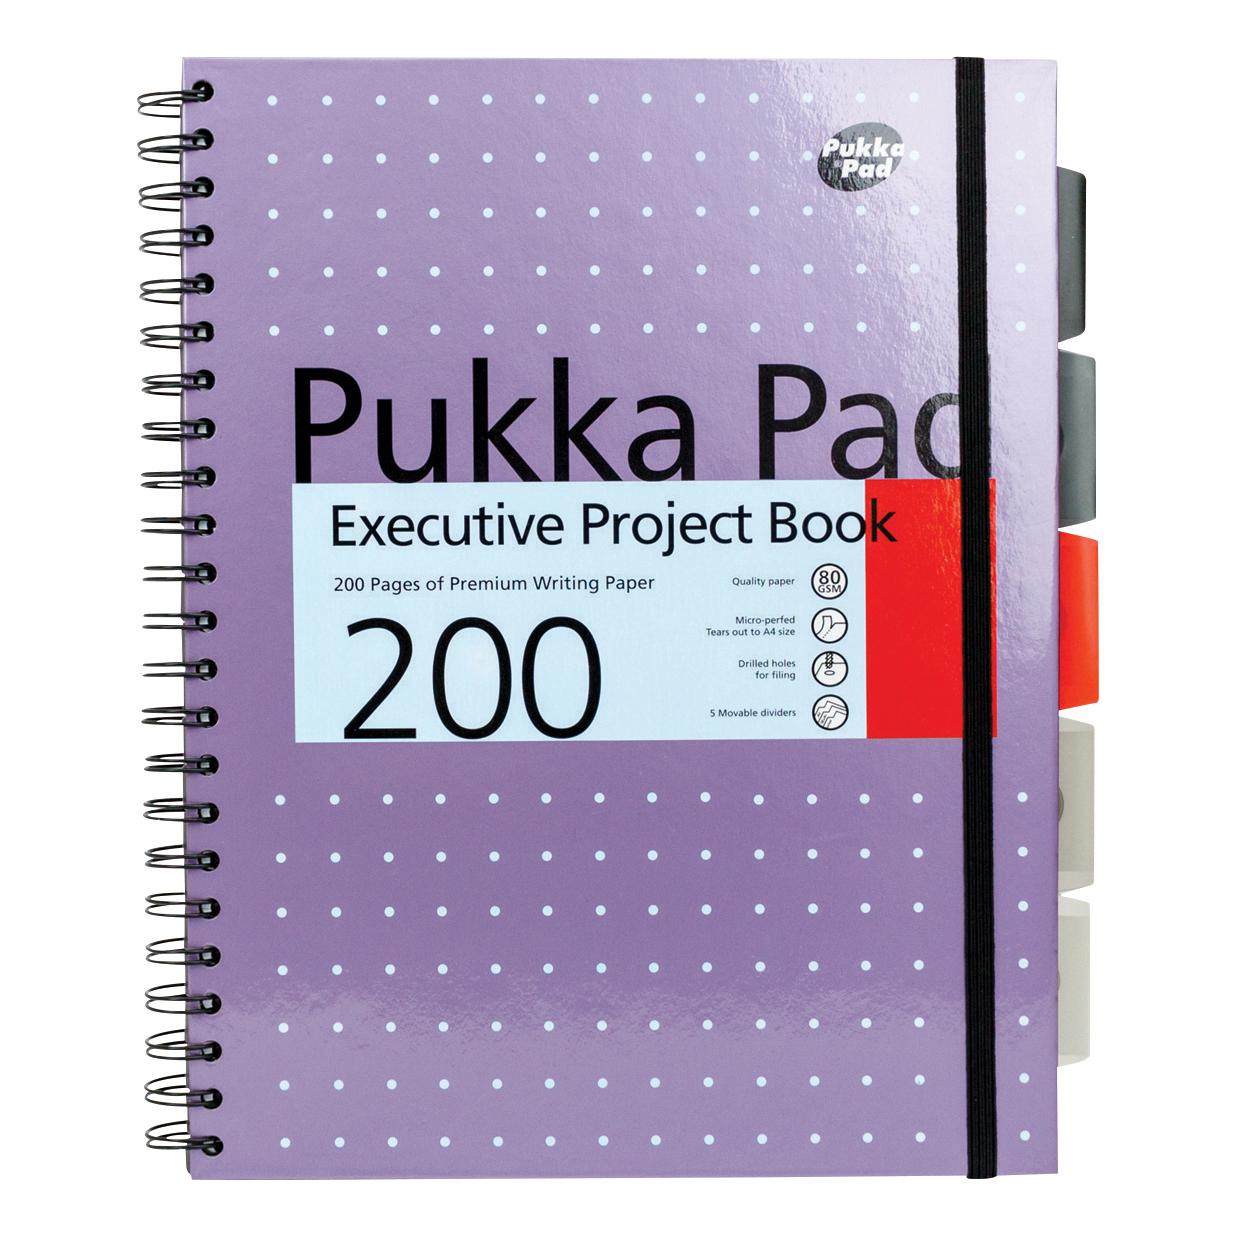 Pukka Pad Metallic A4 Project Notebook Feint 80GSM Ruled With 5 Movable Divider 